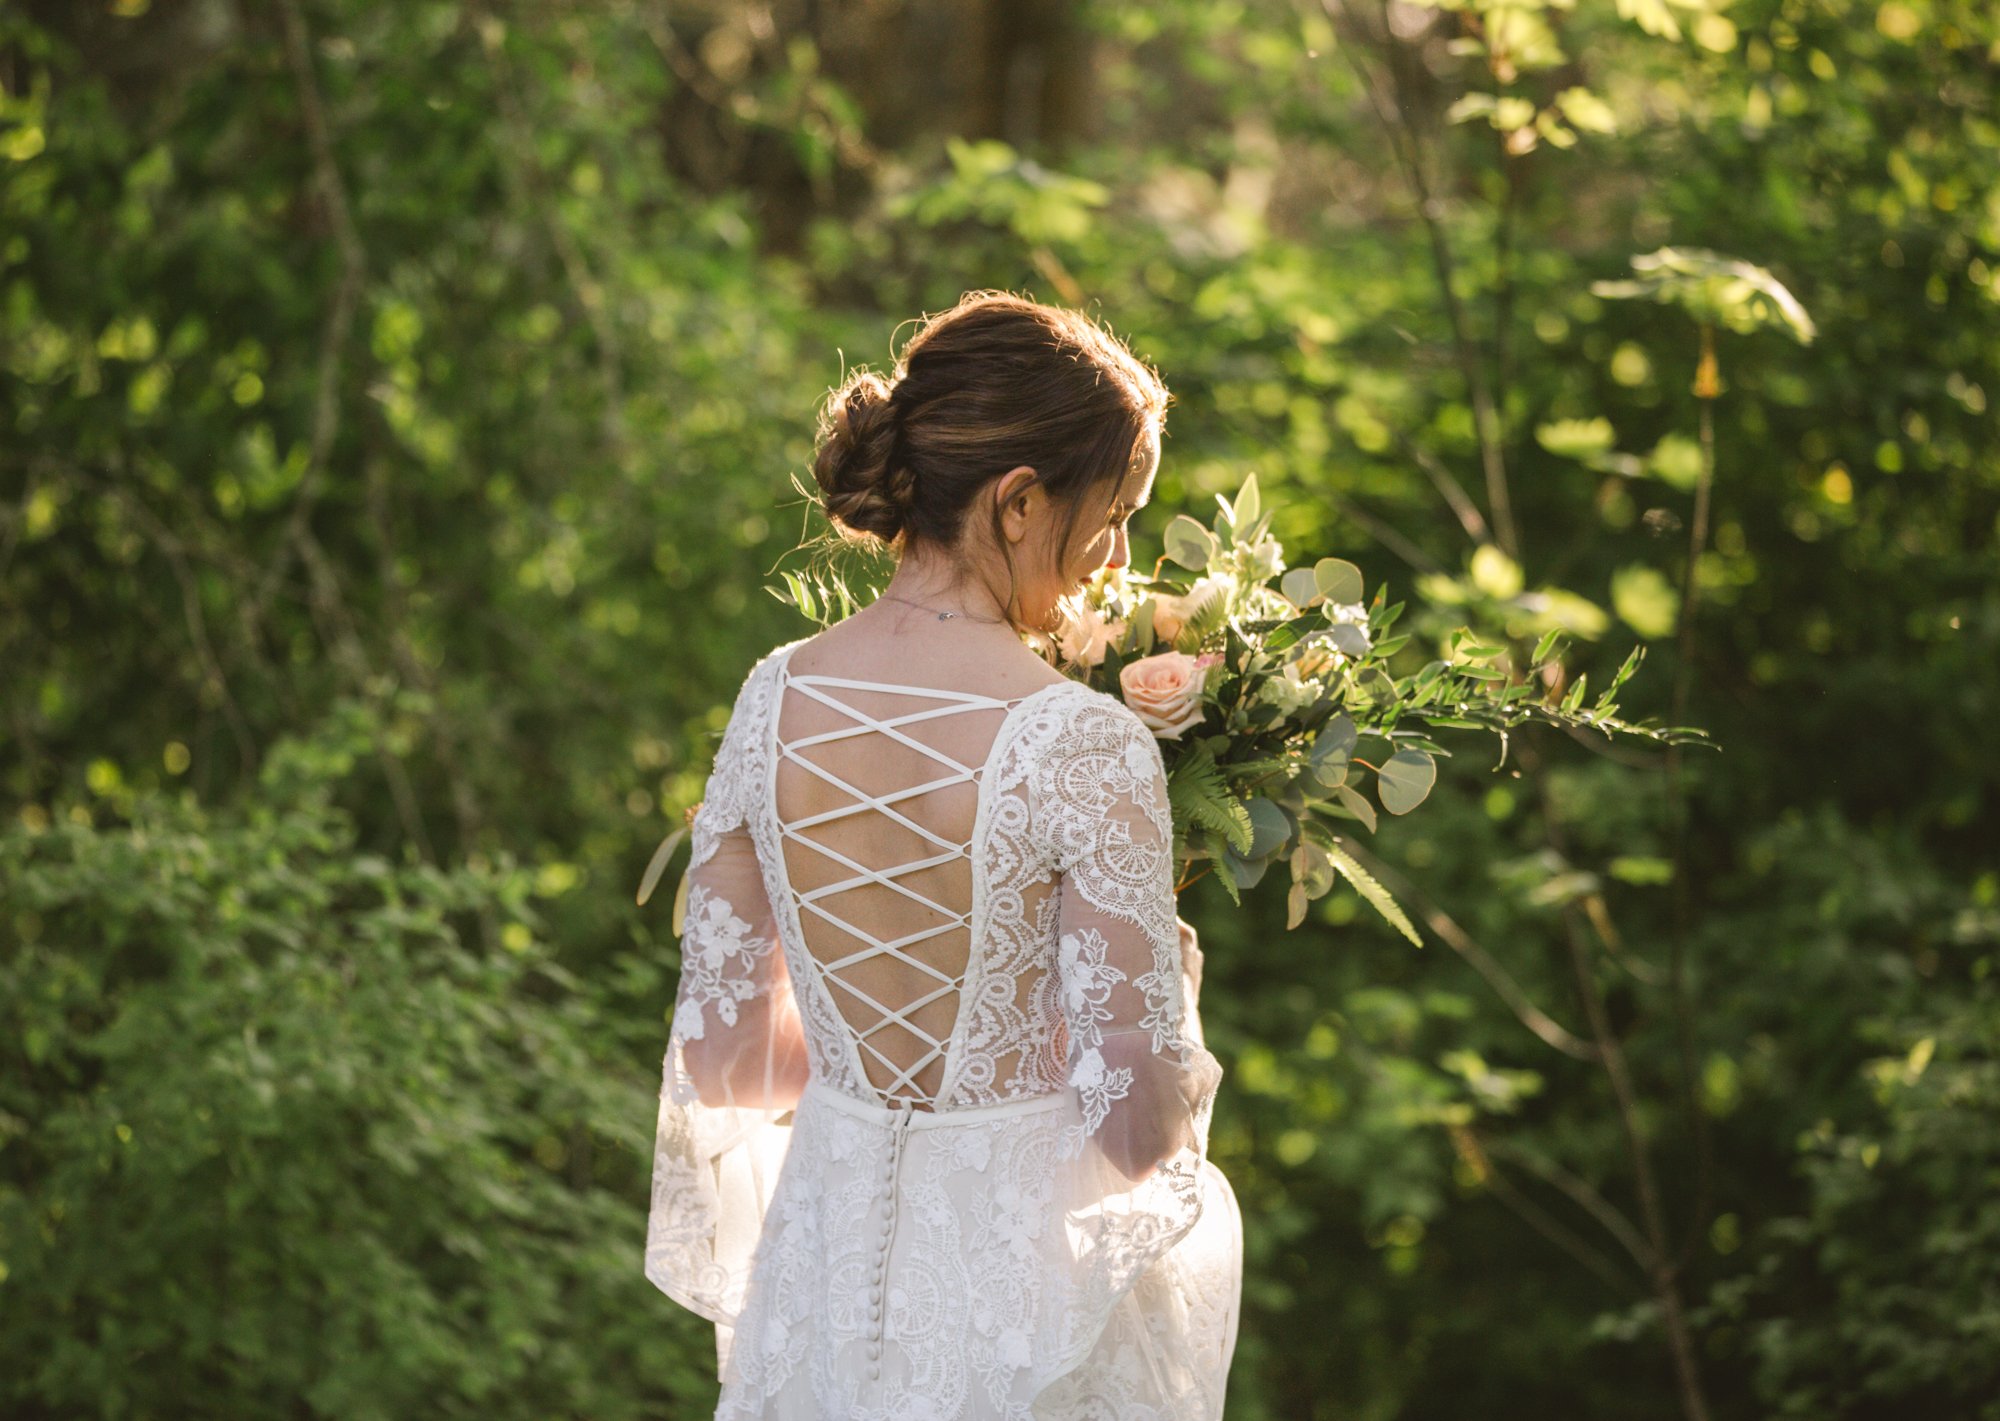 When a wedding dress is truly made for you 🥰 A gorgeous share from Tim &amp; Elizabeth's micro wedding 🧡

#microwedding #elopementwedding #allinclusiveelopementpackage #bestplacetoelope #bestplacetoelopeinwashington #elopementpackages #elopement #w